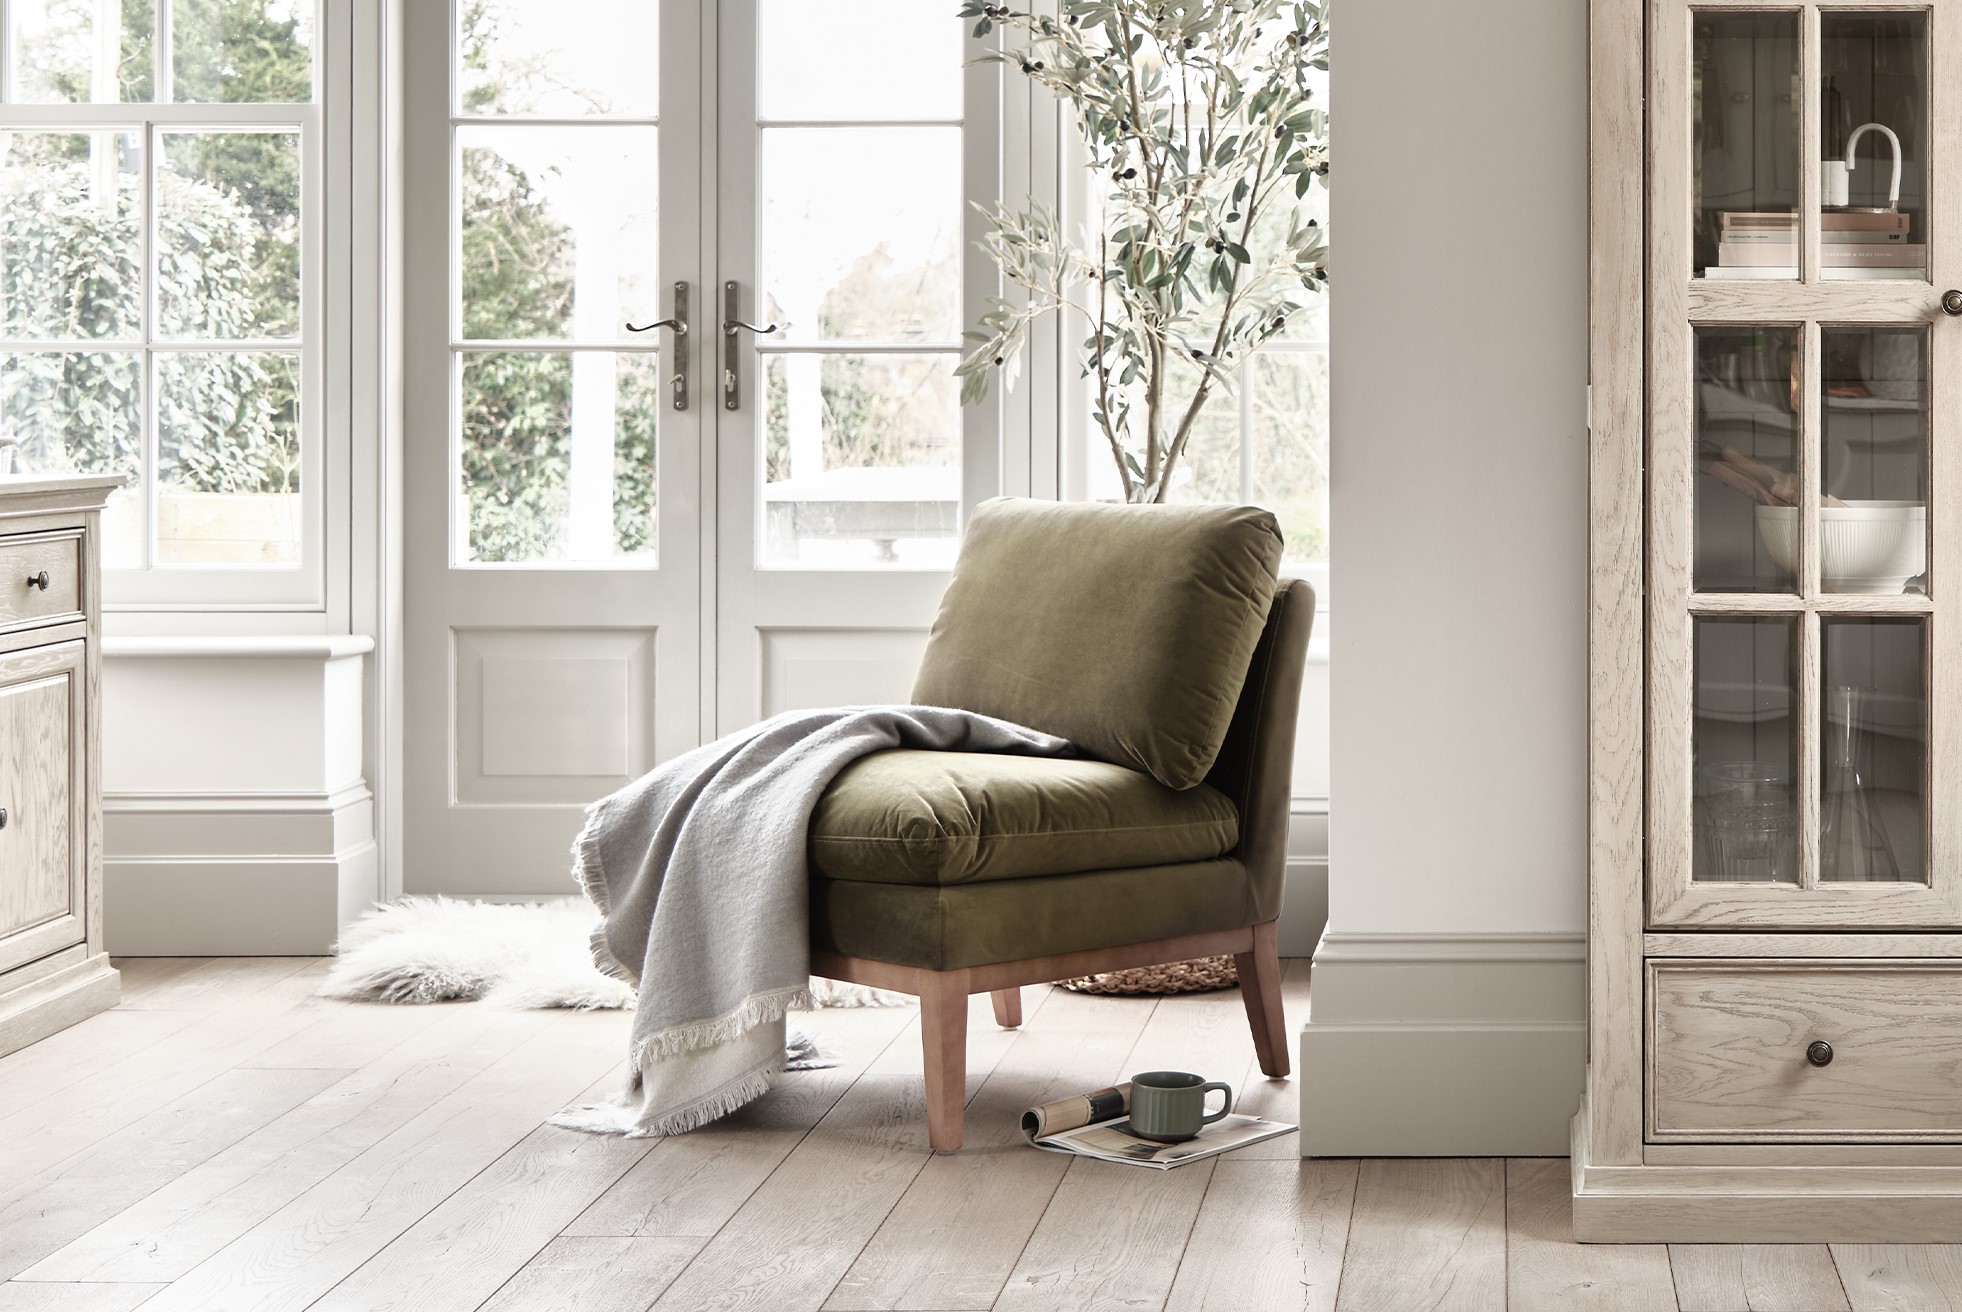 best chairs for the bedroom | the oak furnitureland blog